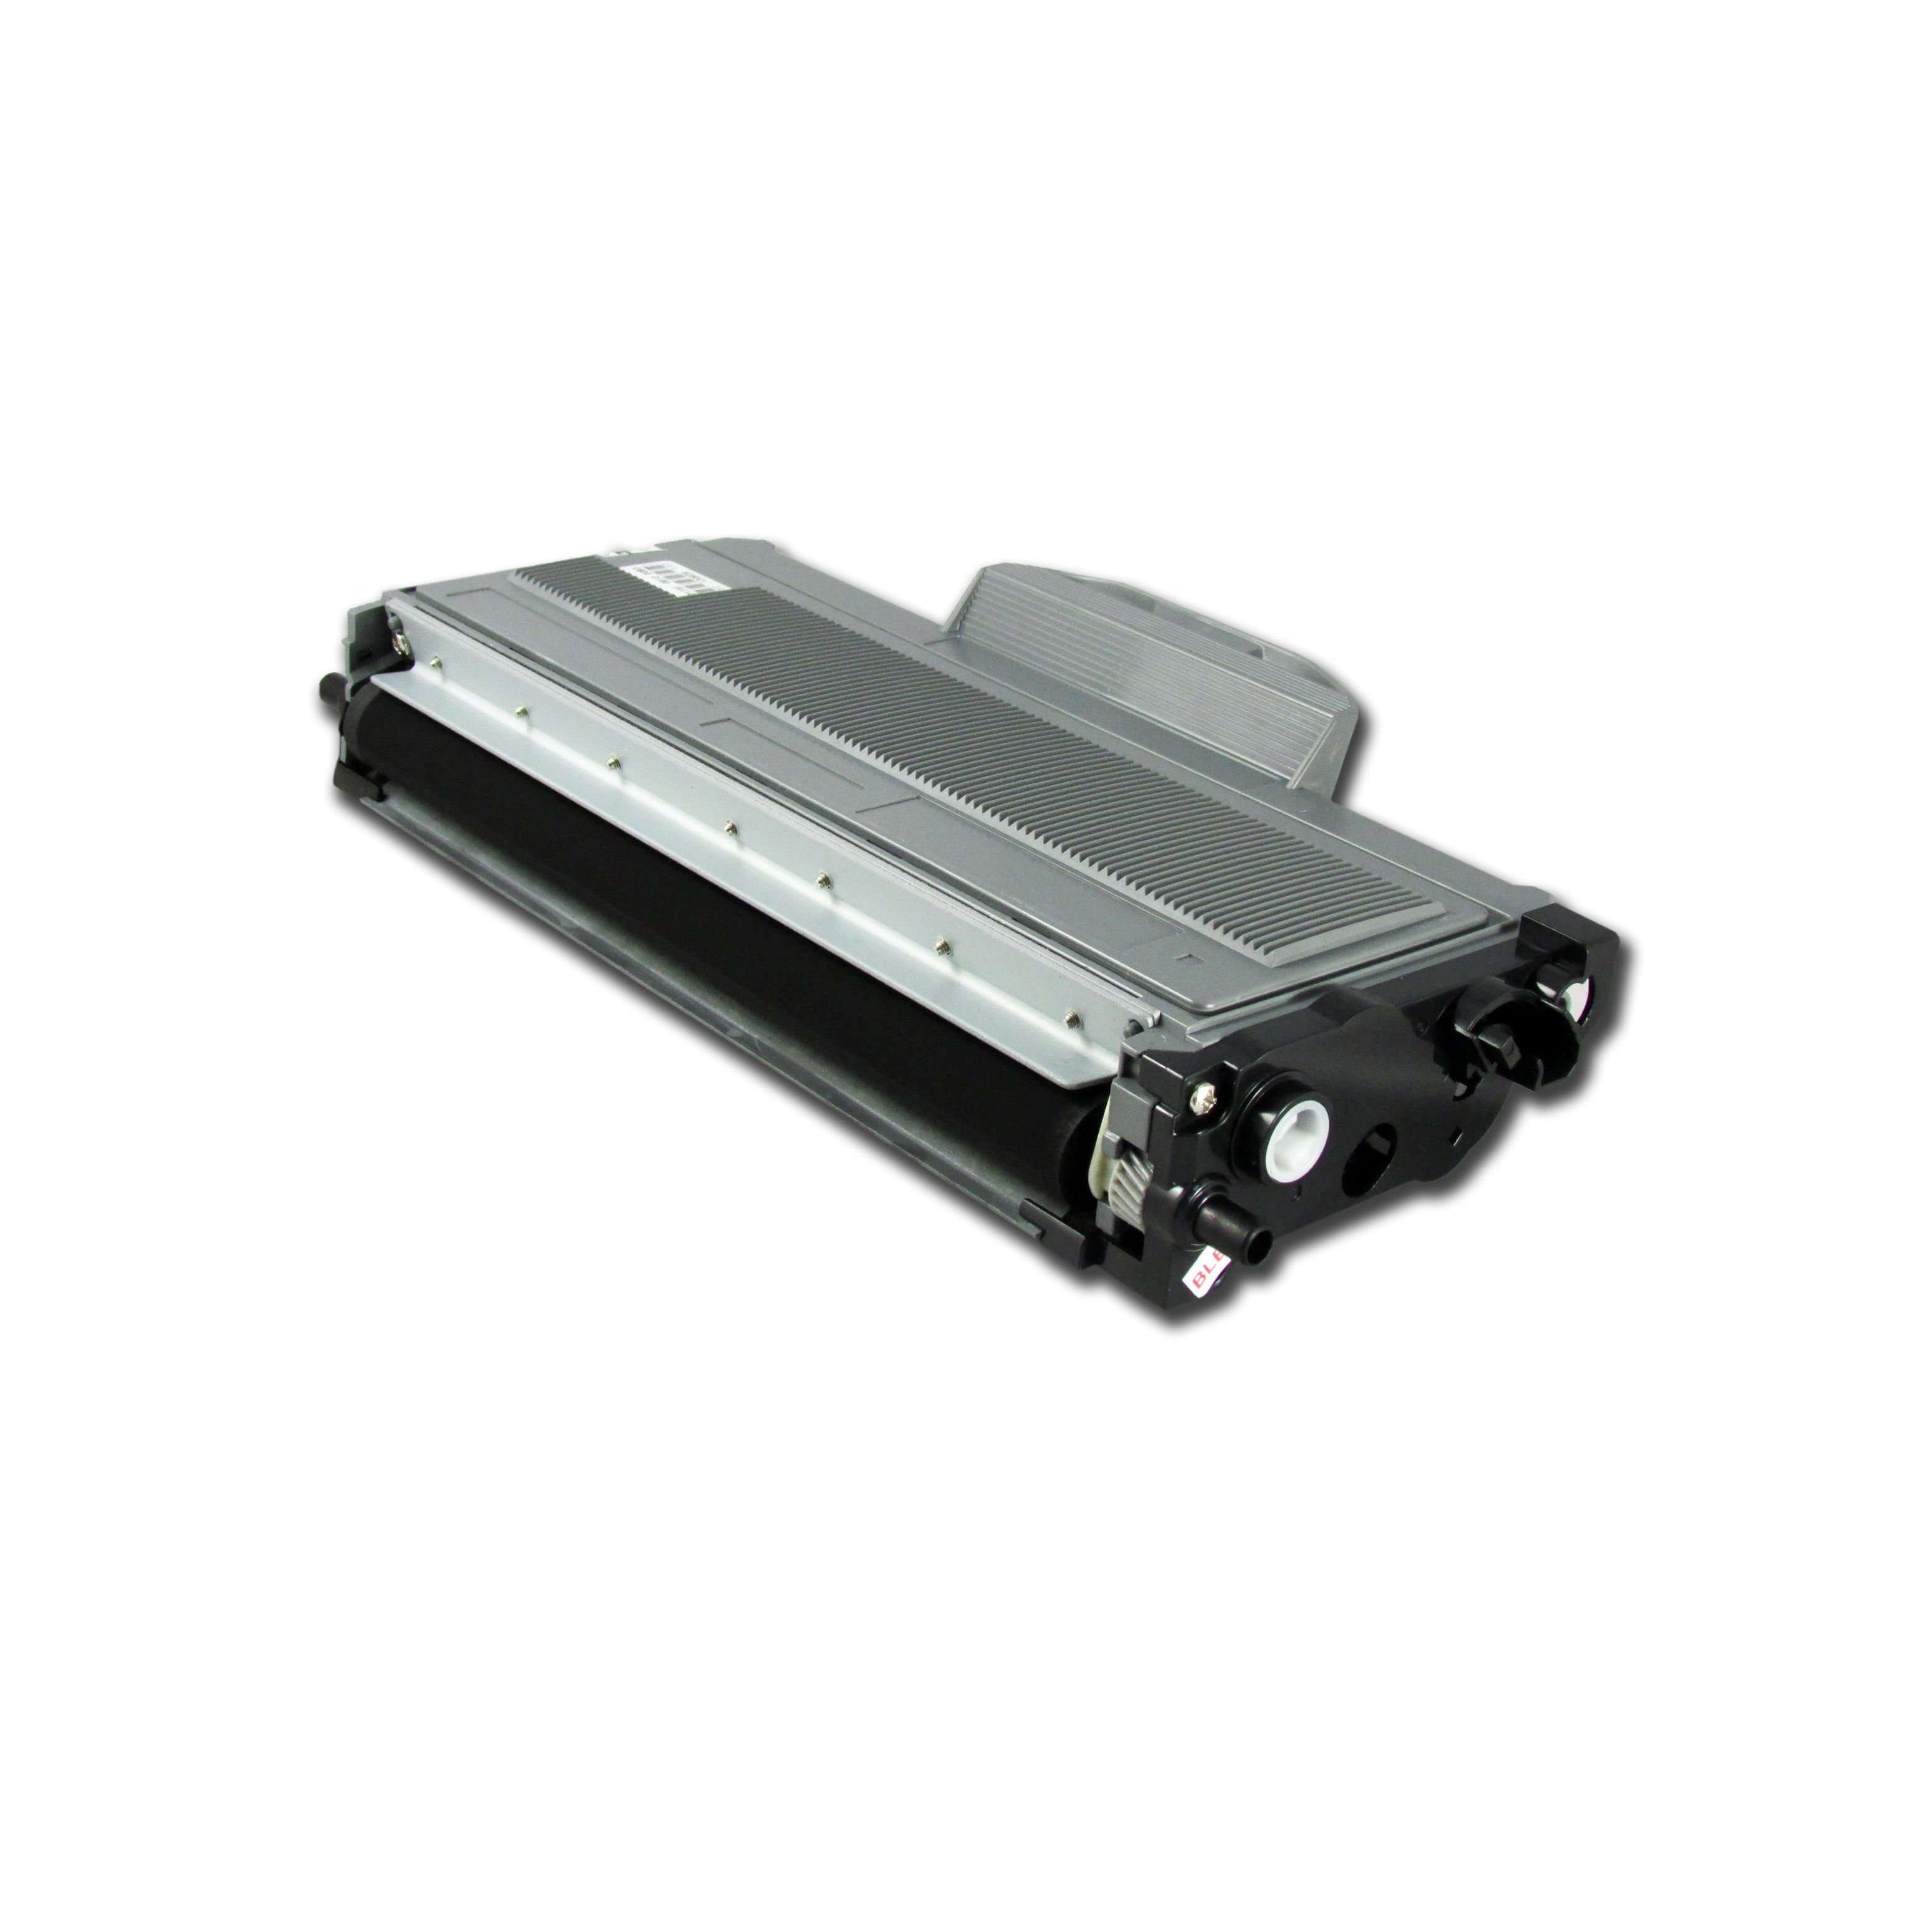 TN360 toner cartridge Use For Brother DCP-7030.etc